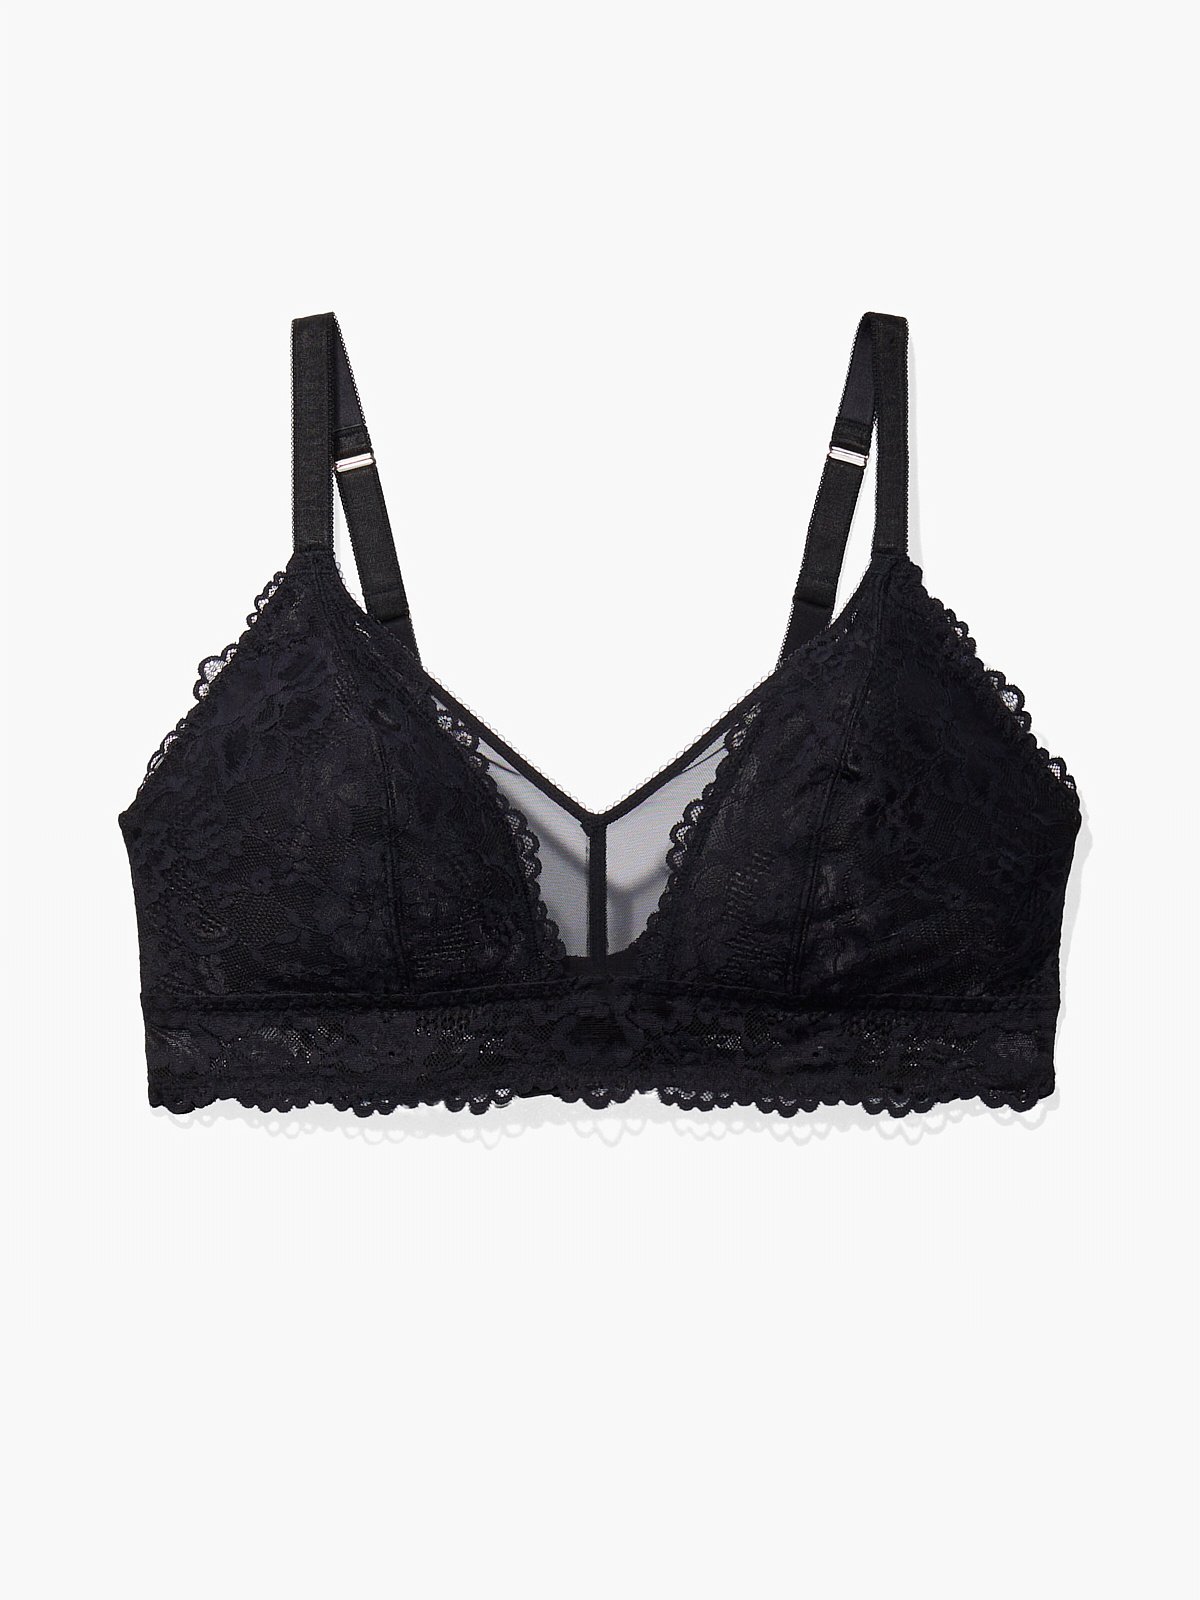 Floral Lace Detail Bralette - Black and white floral